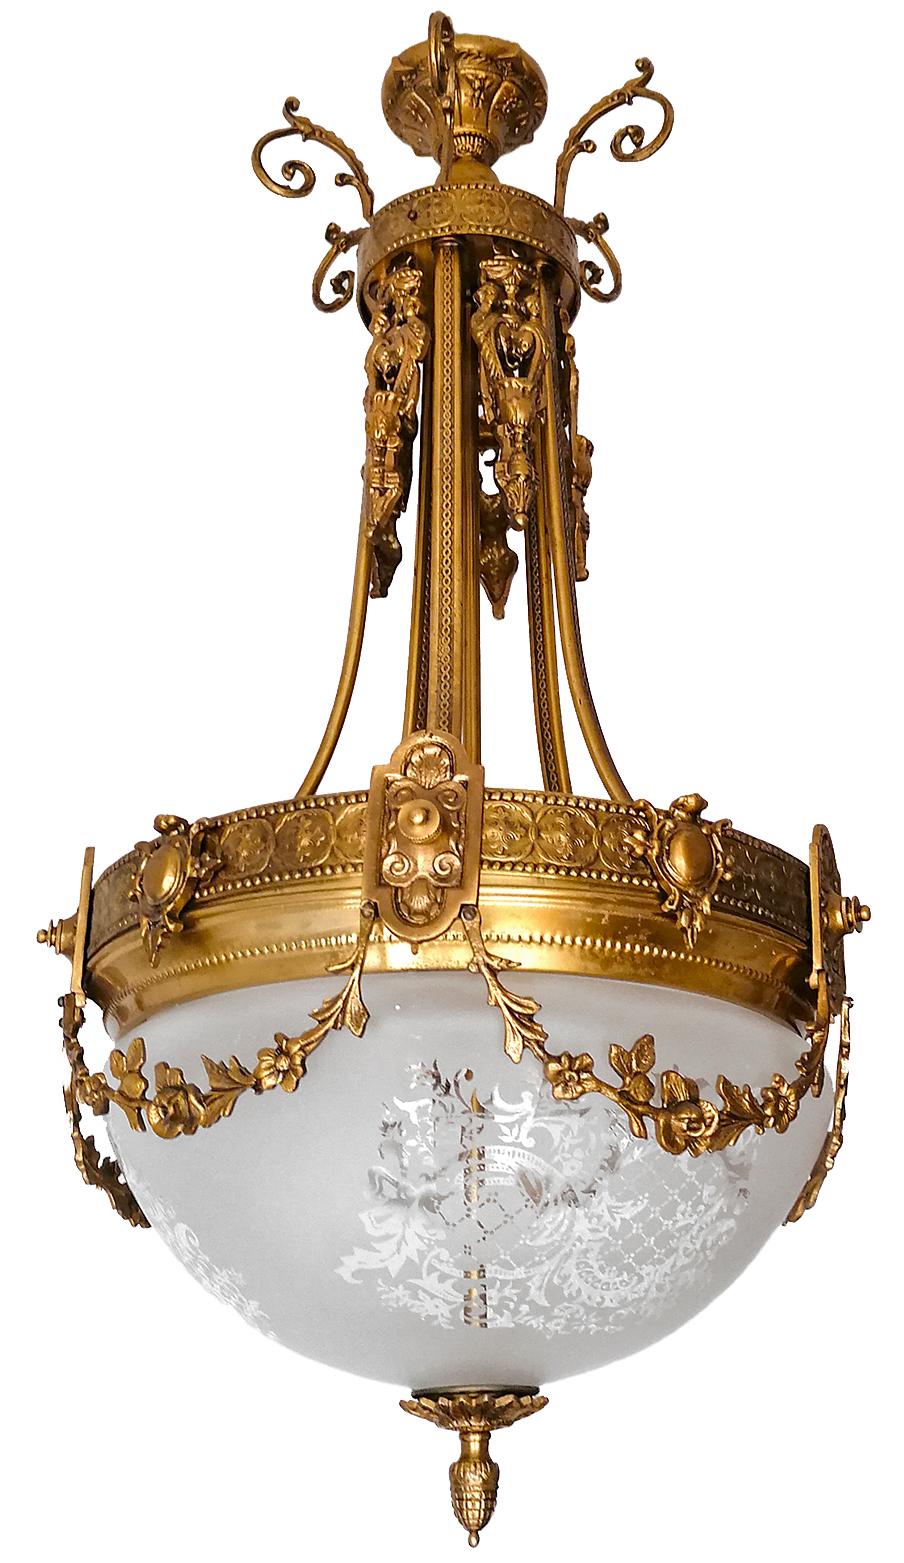 Wonderful gilt bronze and etched-glass two-light ceiling fixture decorated with fine ornaments and garlands, France, 20th century.
In very good condition - original etched-glass shades without damages, bronze with beautiful patina.
Three size E14